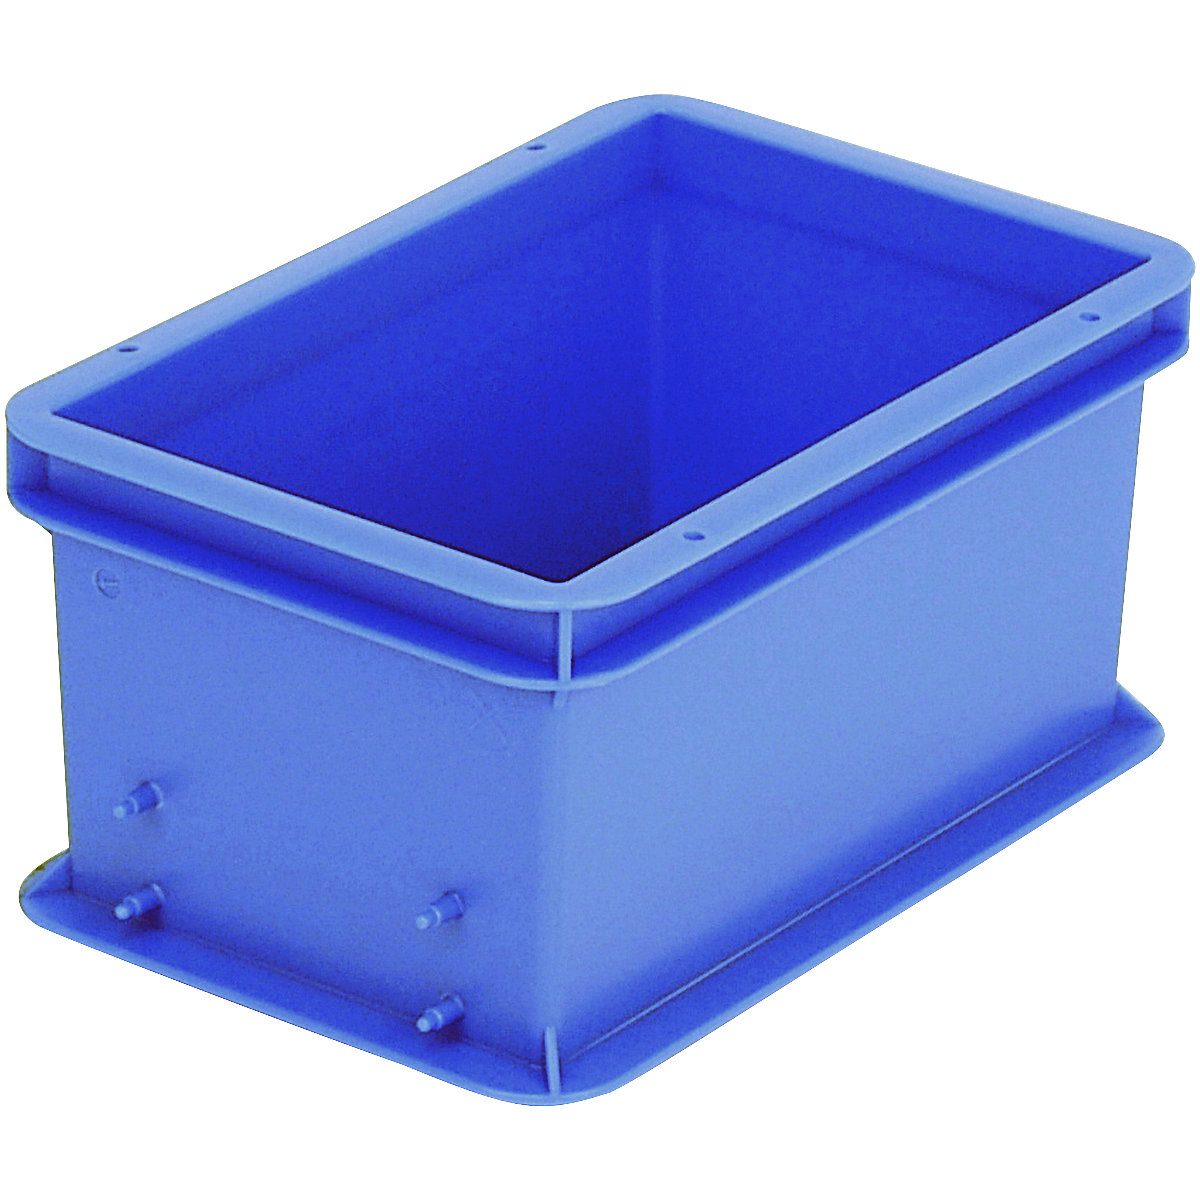 BN Euro stacking container – BITO